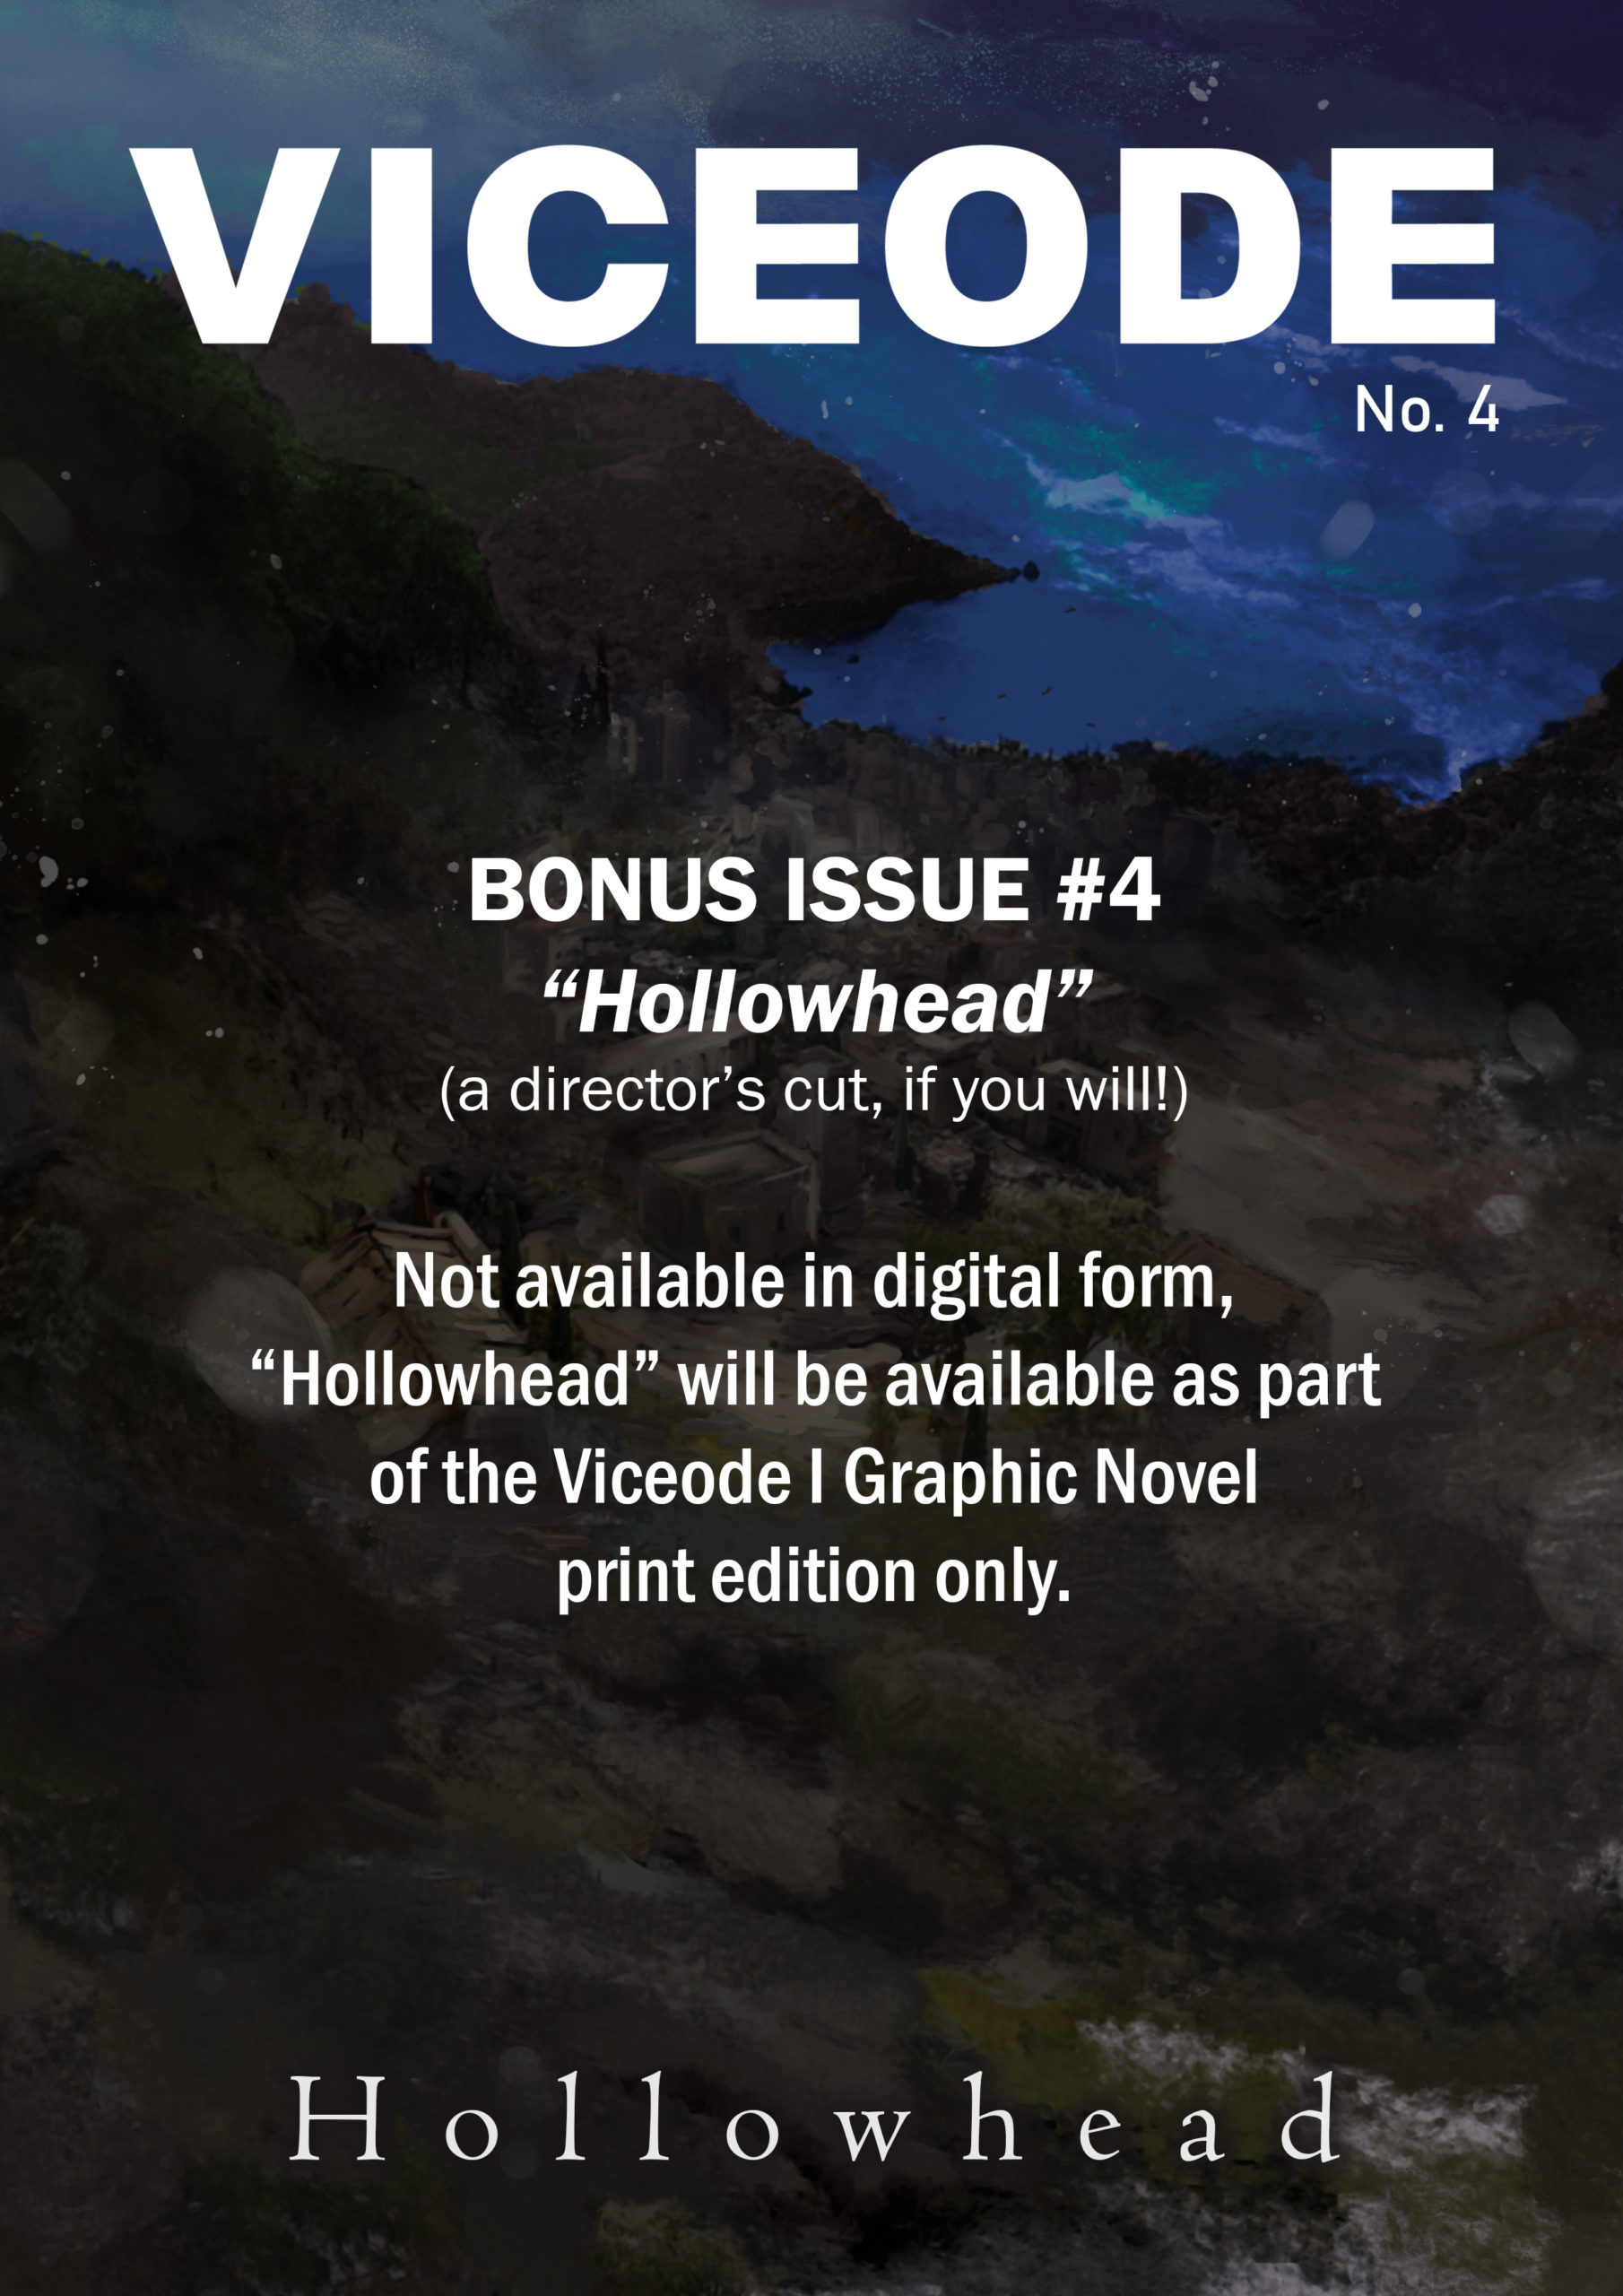 VICEODE Comic Book Issue 4 Hollowhead